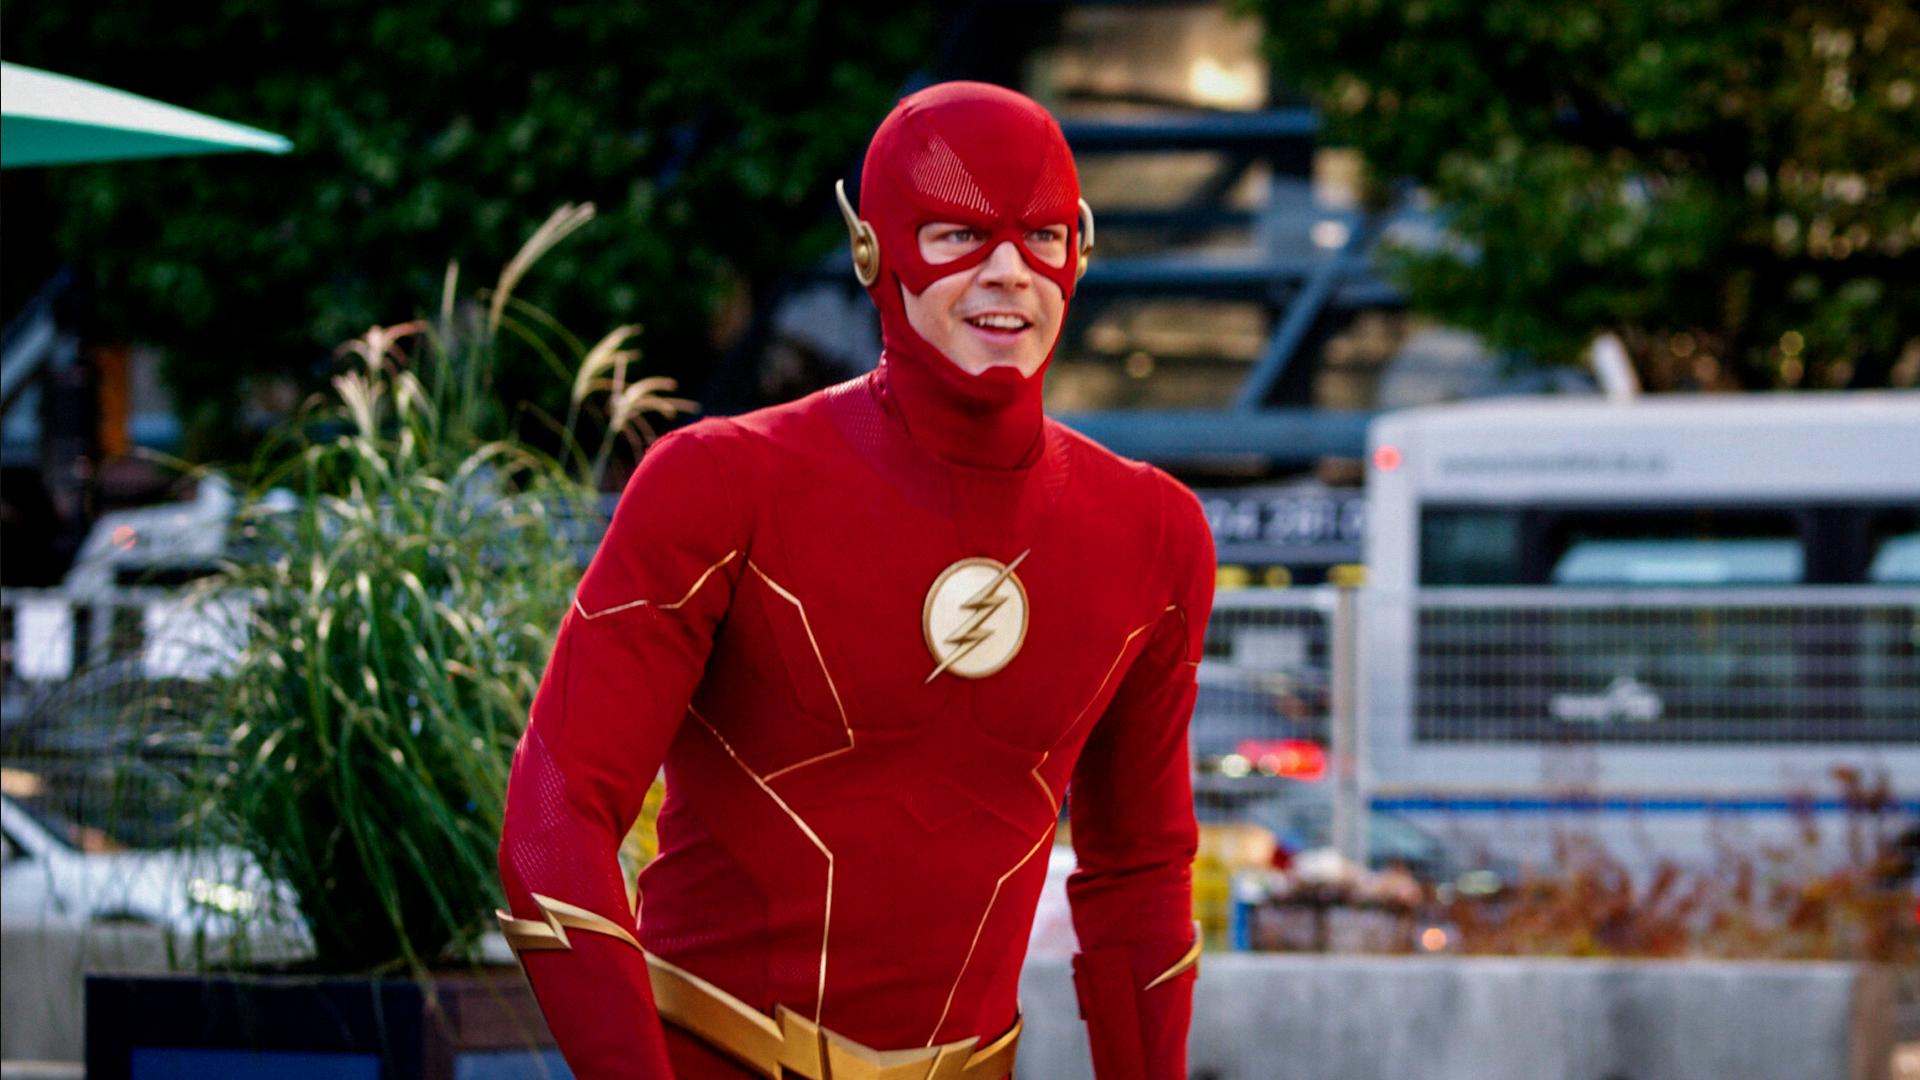 does flash have super strength